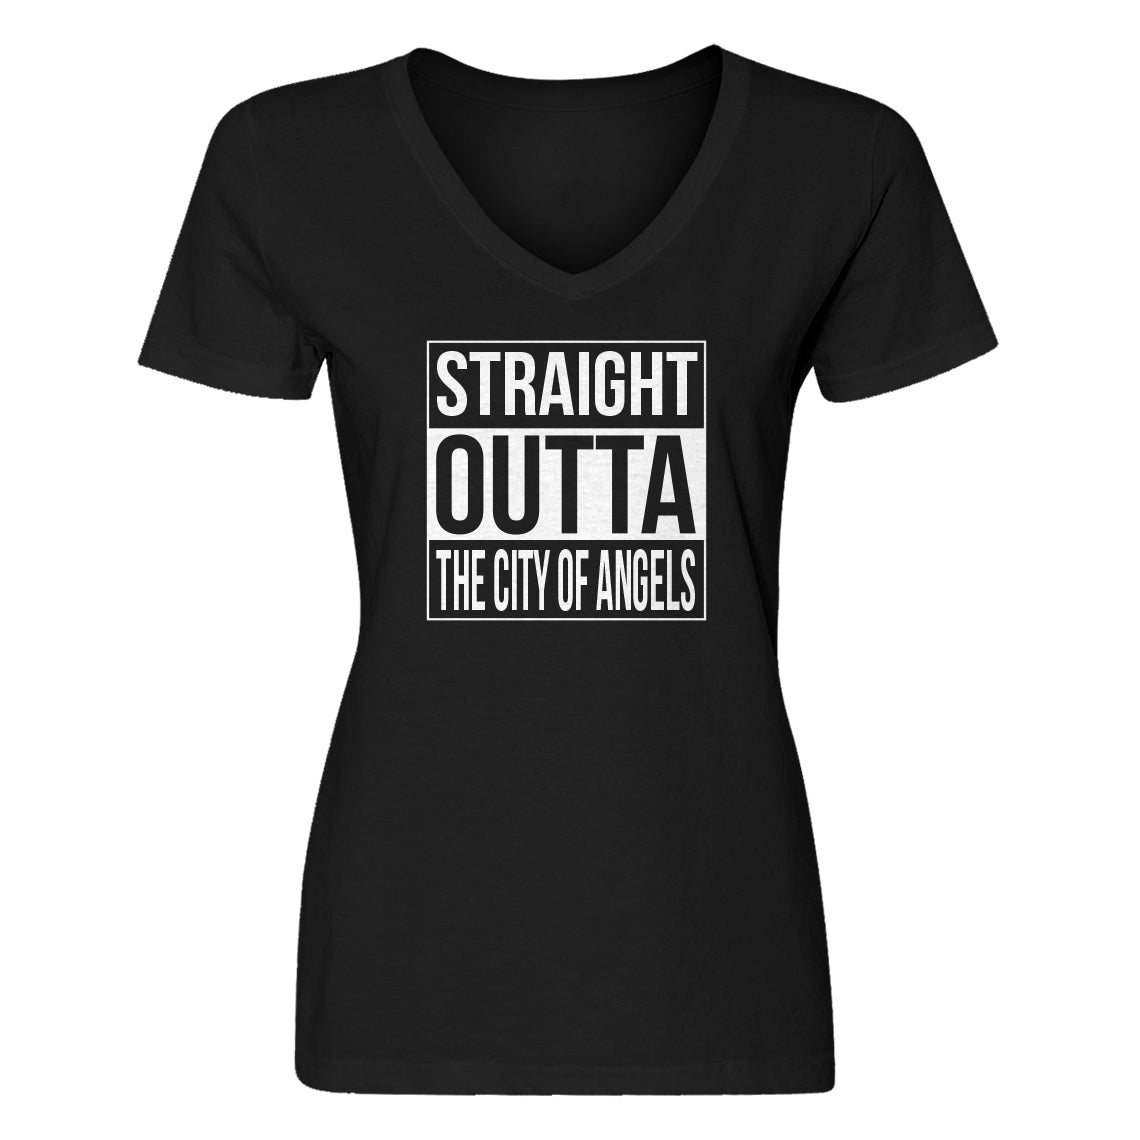 Womens Straight Outta The City of Angels V-Neck T-shirt